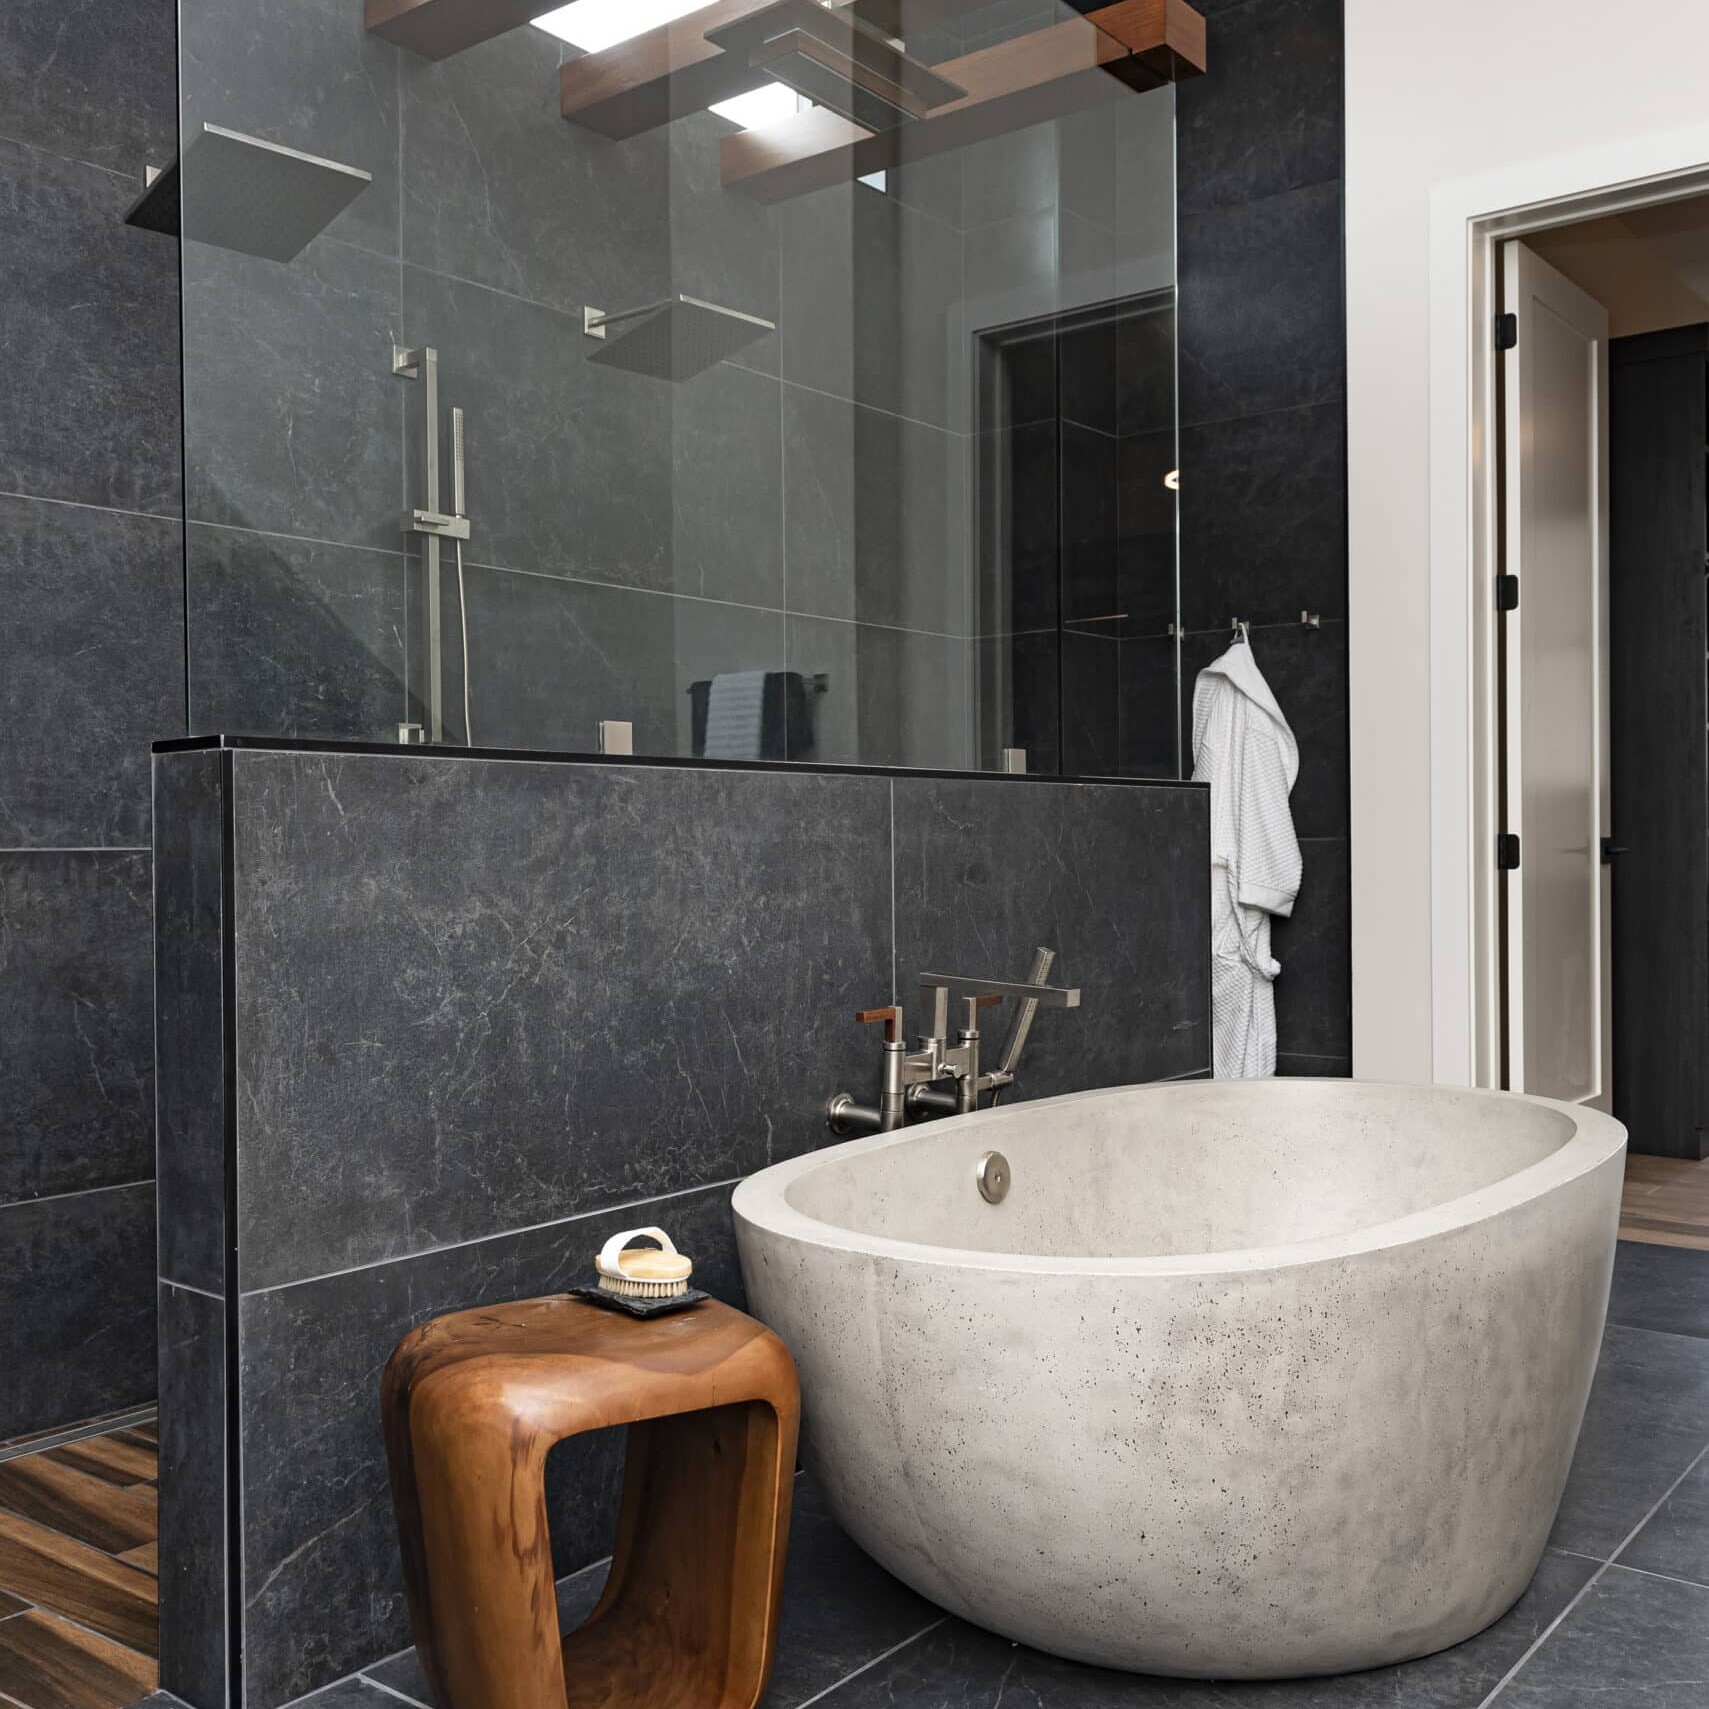 A bathroom with a large tub and a glass shower.